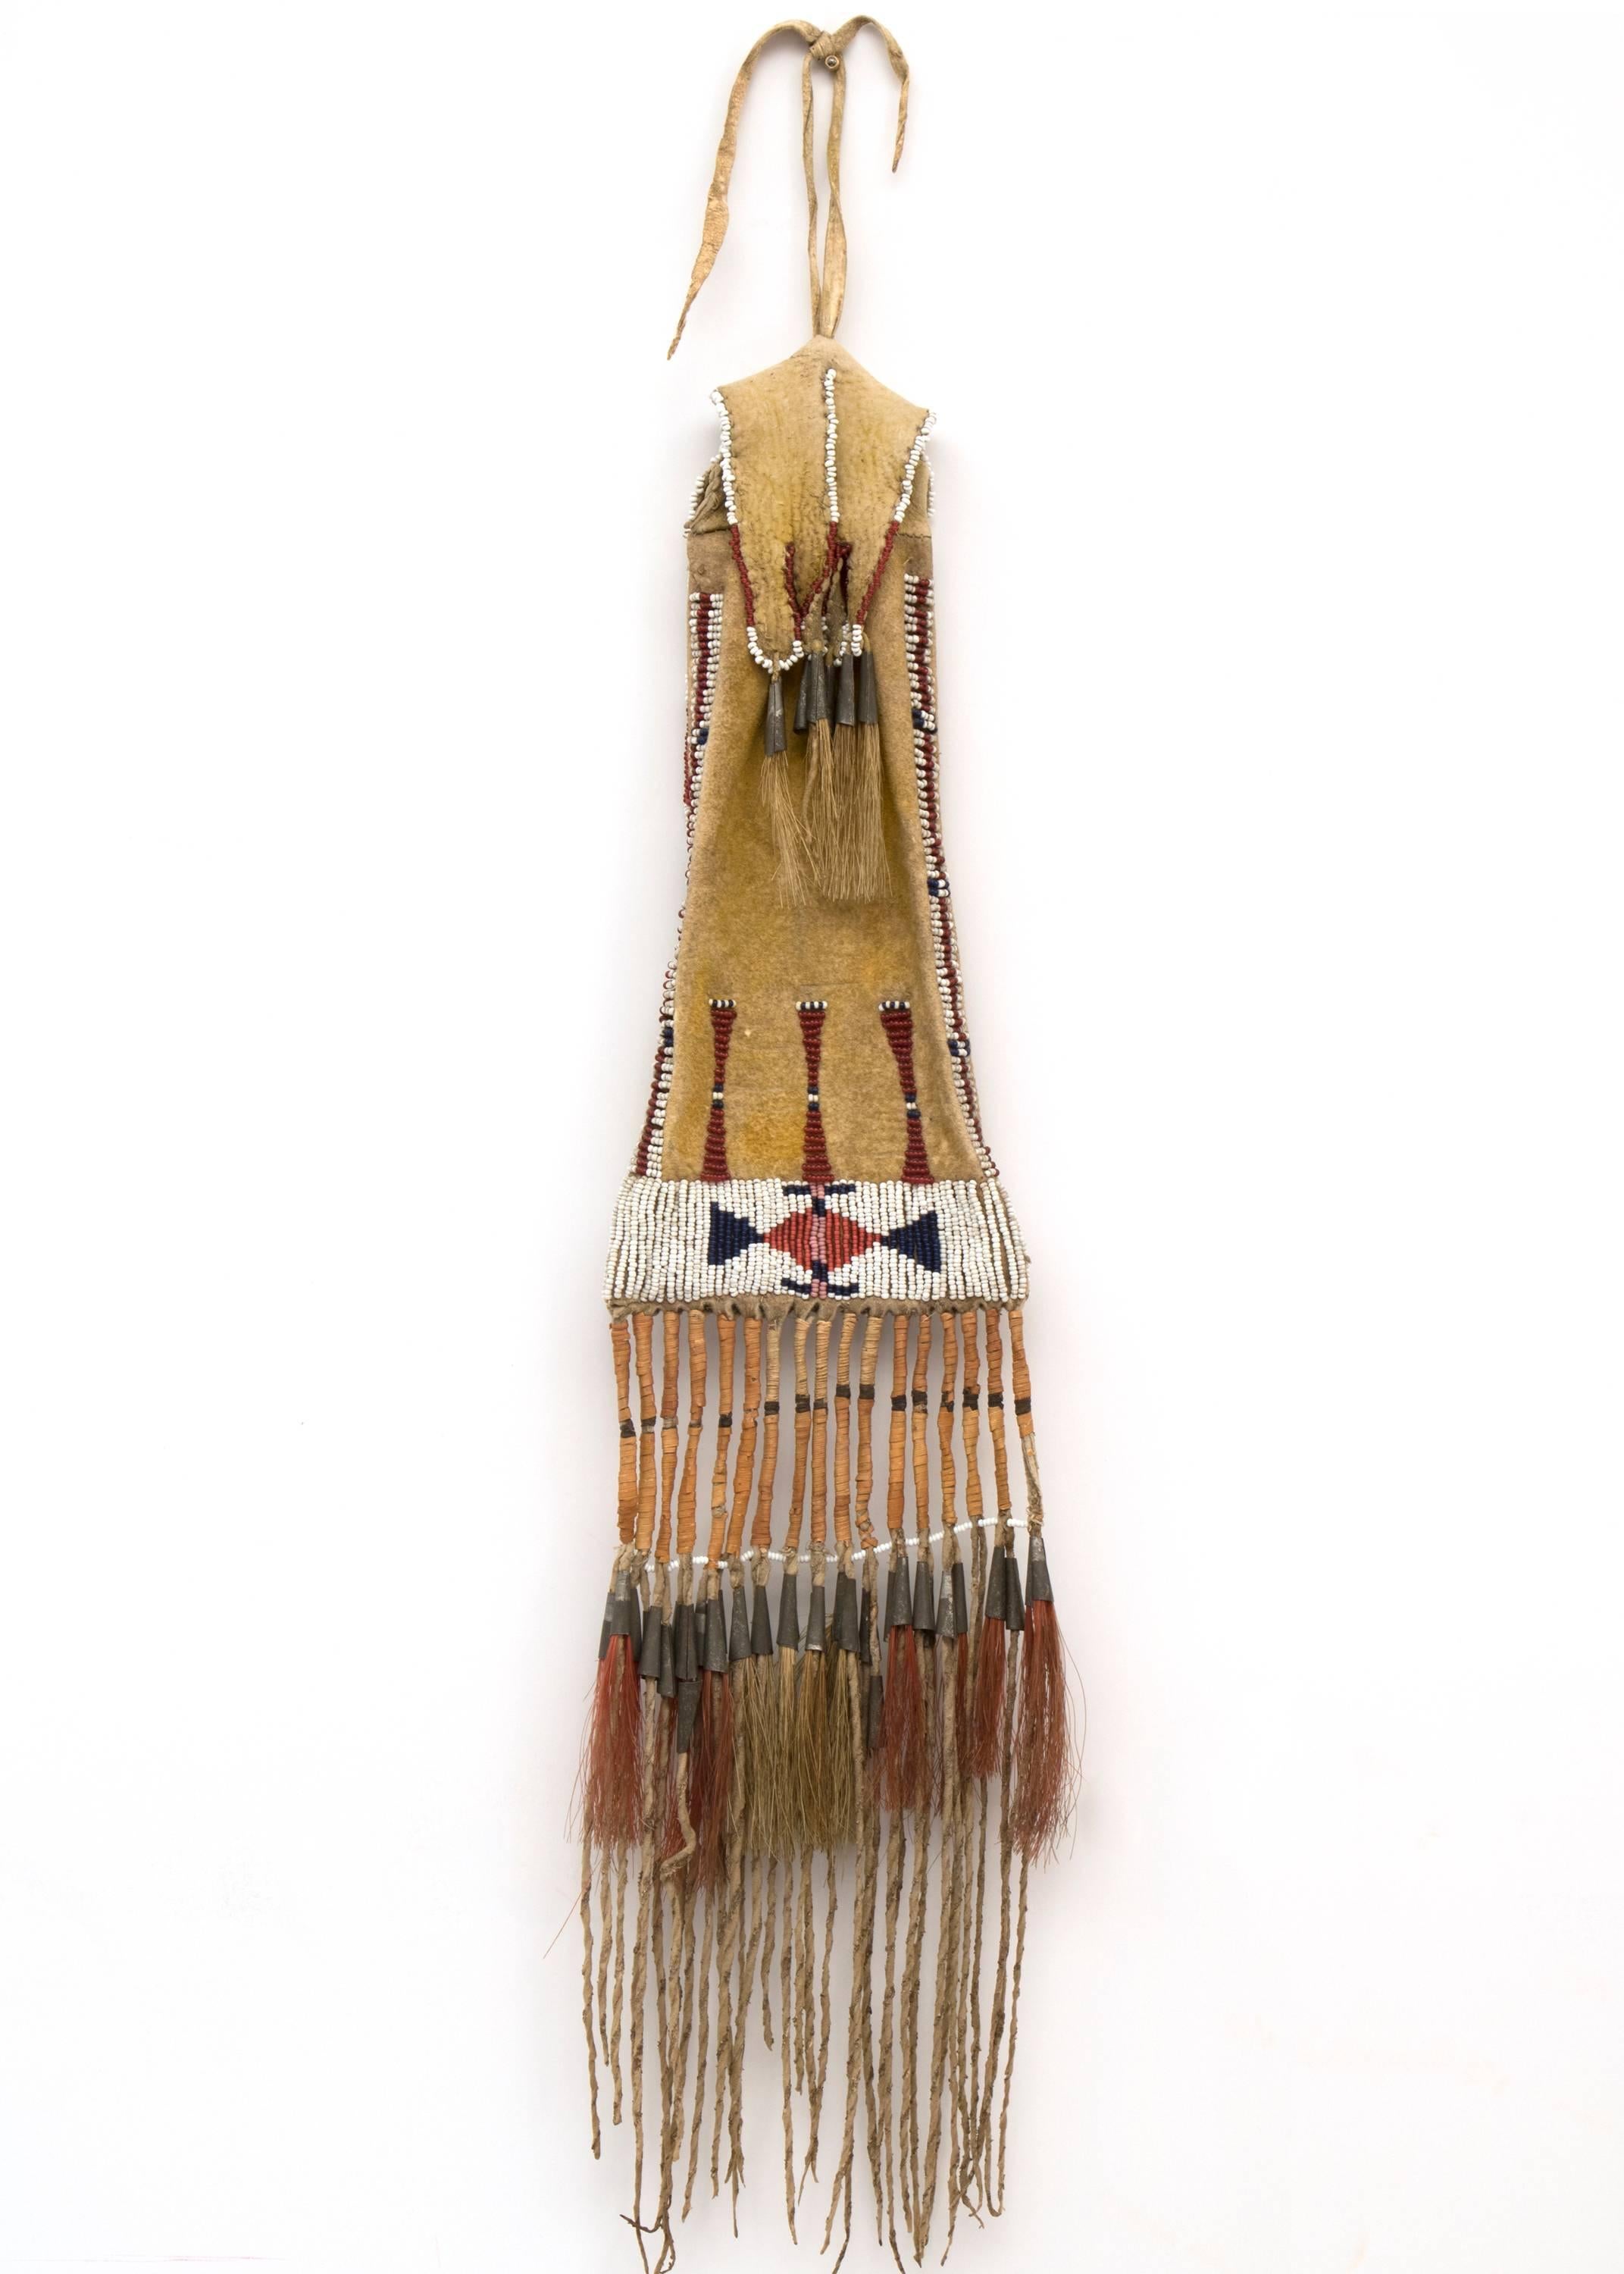 A late Classic period women's Southern Arapaho tobacco bag. Constructed of native tanned hide with glass trade beads, horse hair and tin-cone tinklers.

Provenance:
Peter Gruber (Mandalay Entertainment)
Private Collection, Aspen.

Expedited